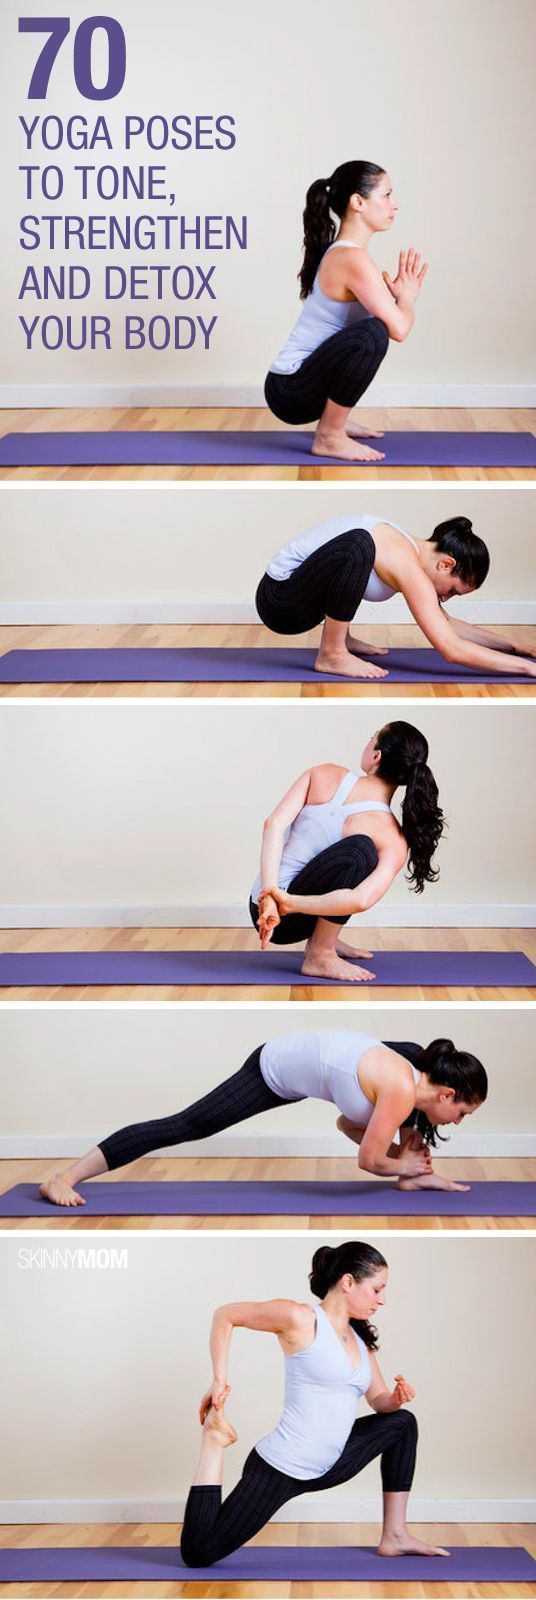 Best Yoga Asanas For Losing Weight Quickly And Easily: There are 24 best yoga asanas for weight loss. These include back-bend